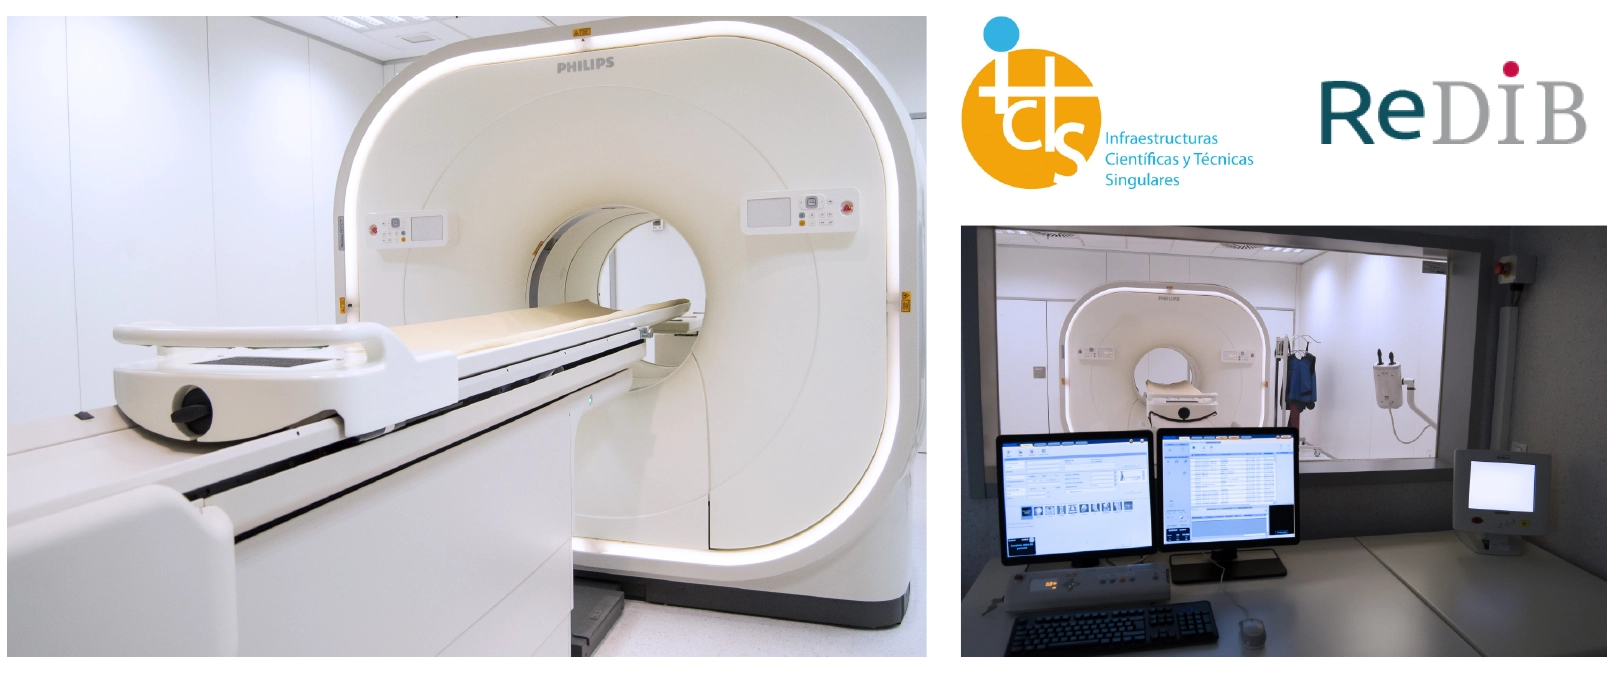 NEW EQUIPMENT FOR THE TRIMA@CNIC NODE OF THE DISTRIBUTED BIOMEDICAL IMAGING NETWORK (ReDIB)